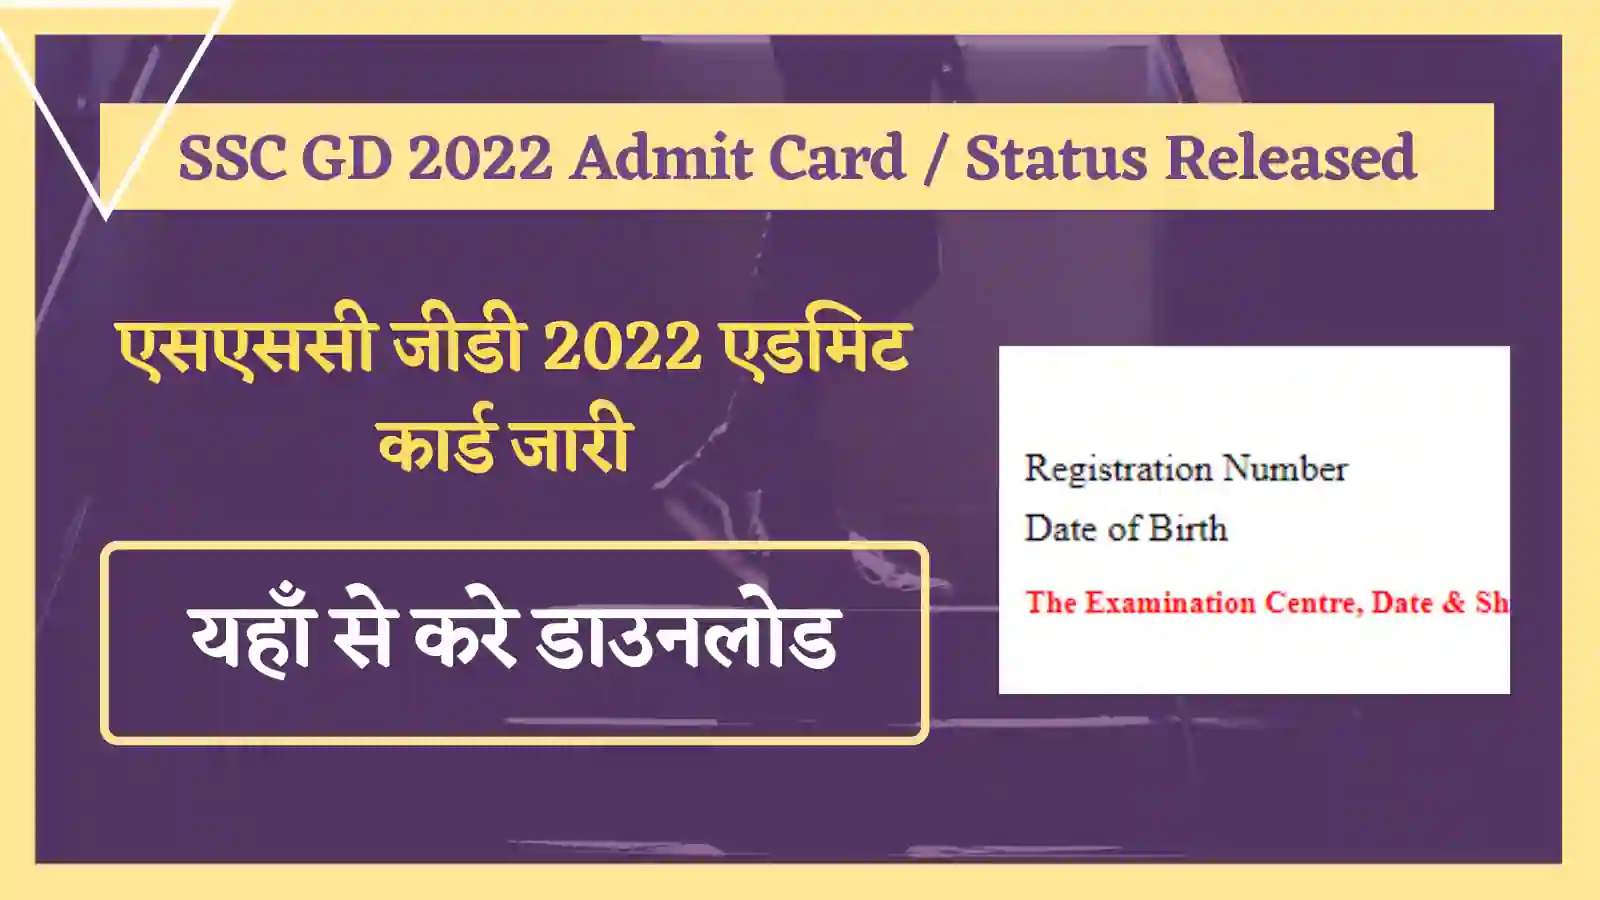 SSC GD 2022 Admit Card / Status Released download